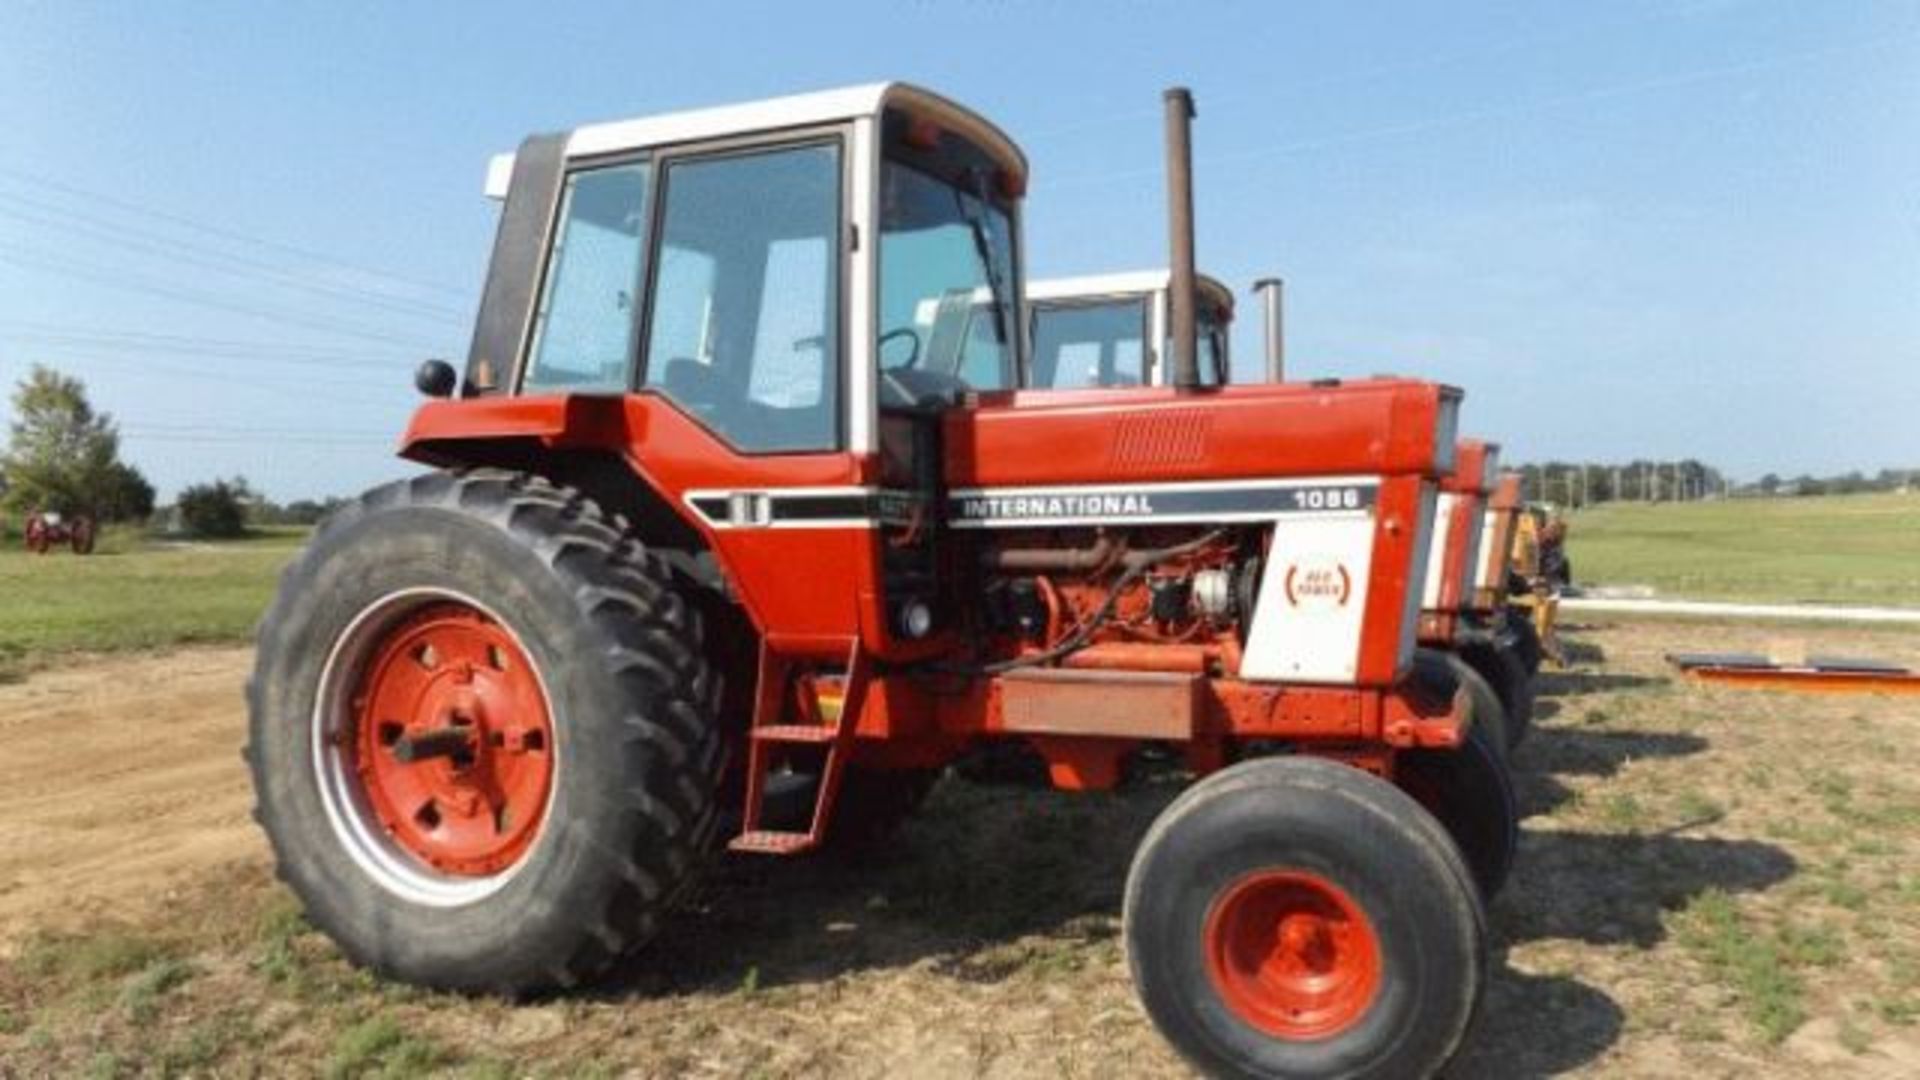 Lot 405 IH 1086 Tractor, 1978 6471 hrs, CAH, 2 SCVs, Dual PTO, Good TA, 3pt - Image 2 of 4